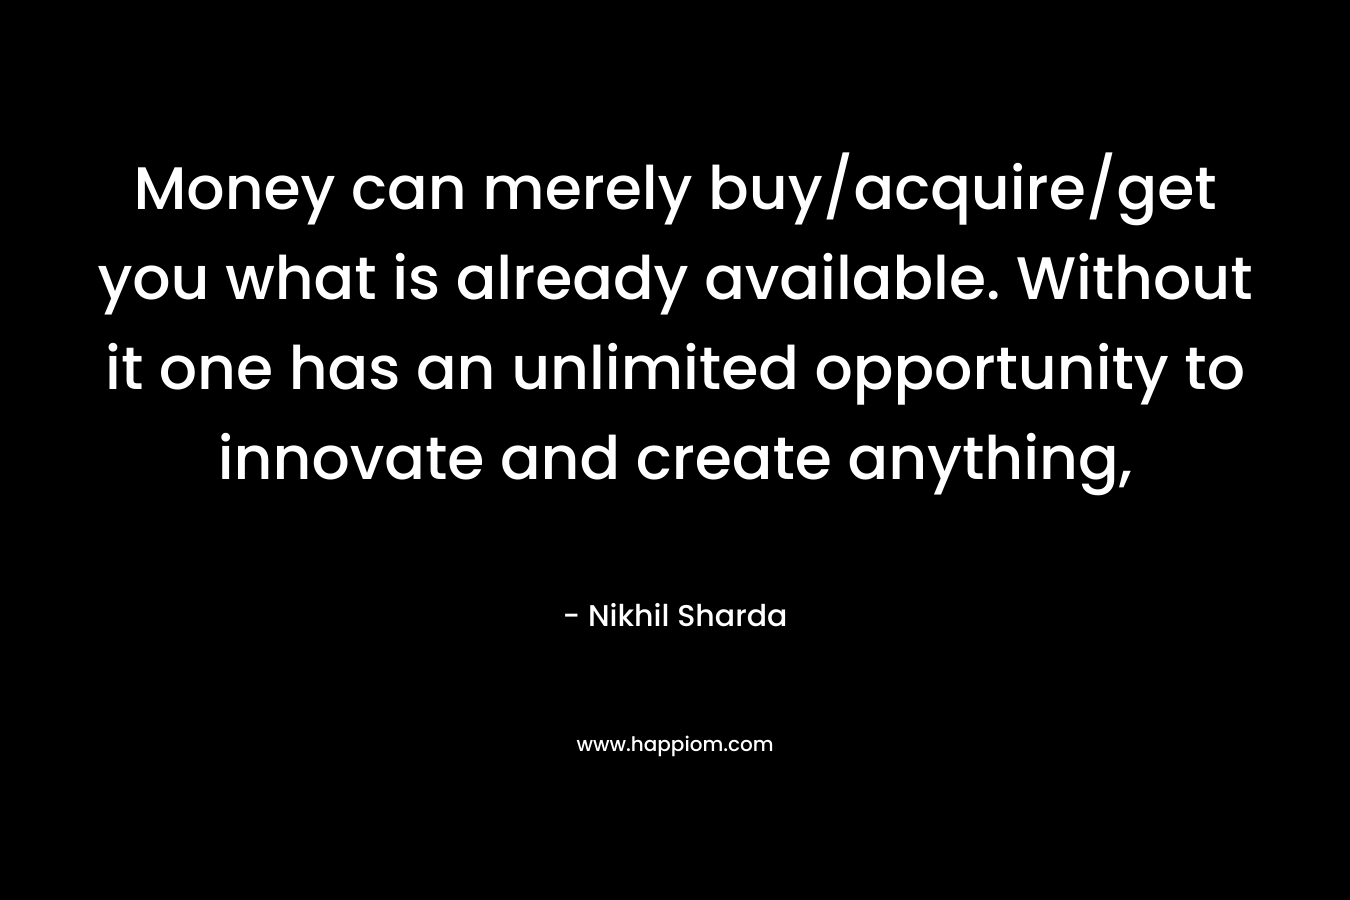 Money can merely buy/acquire/get you what is already available. Without it one has an unlimited opportunity to innovate and create anything, – Nikhil Sharda